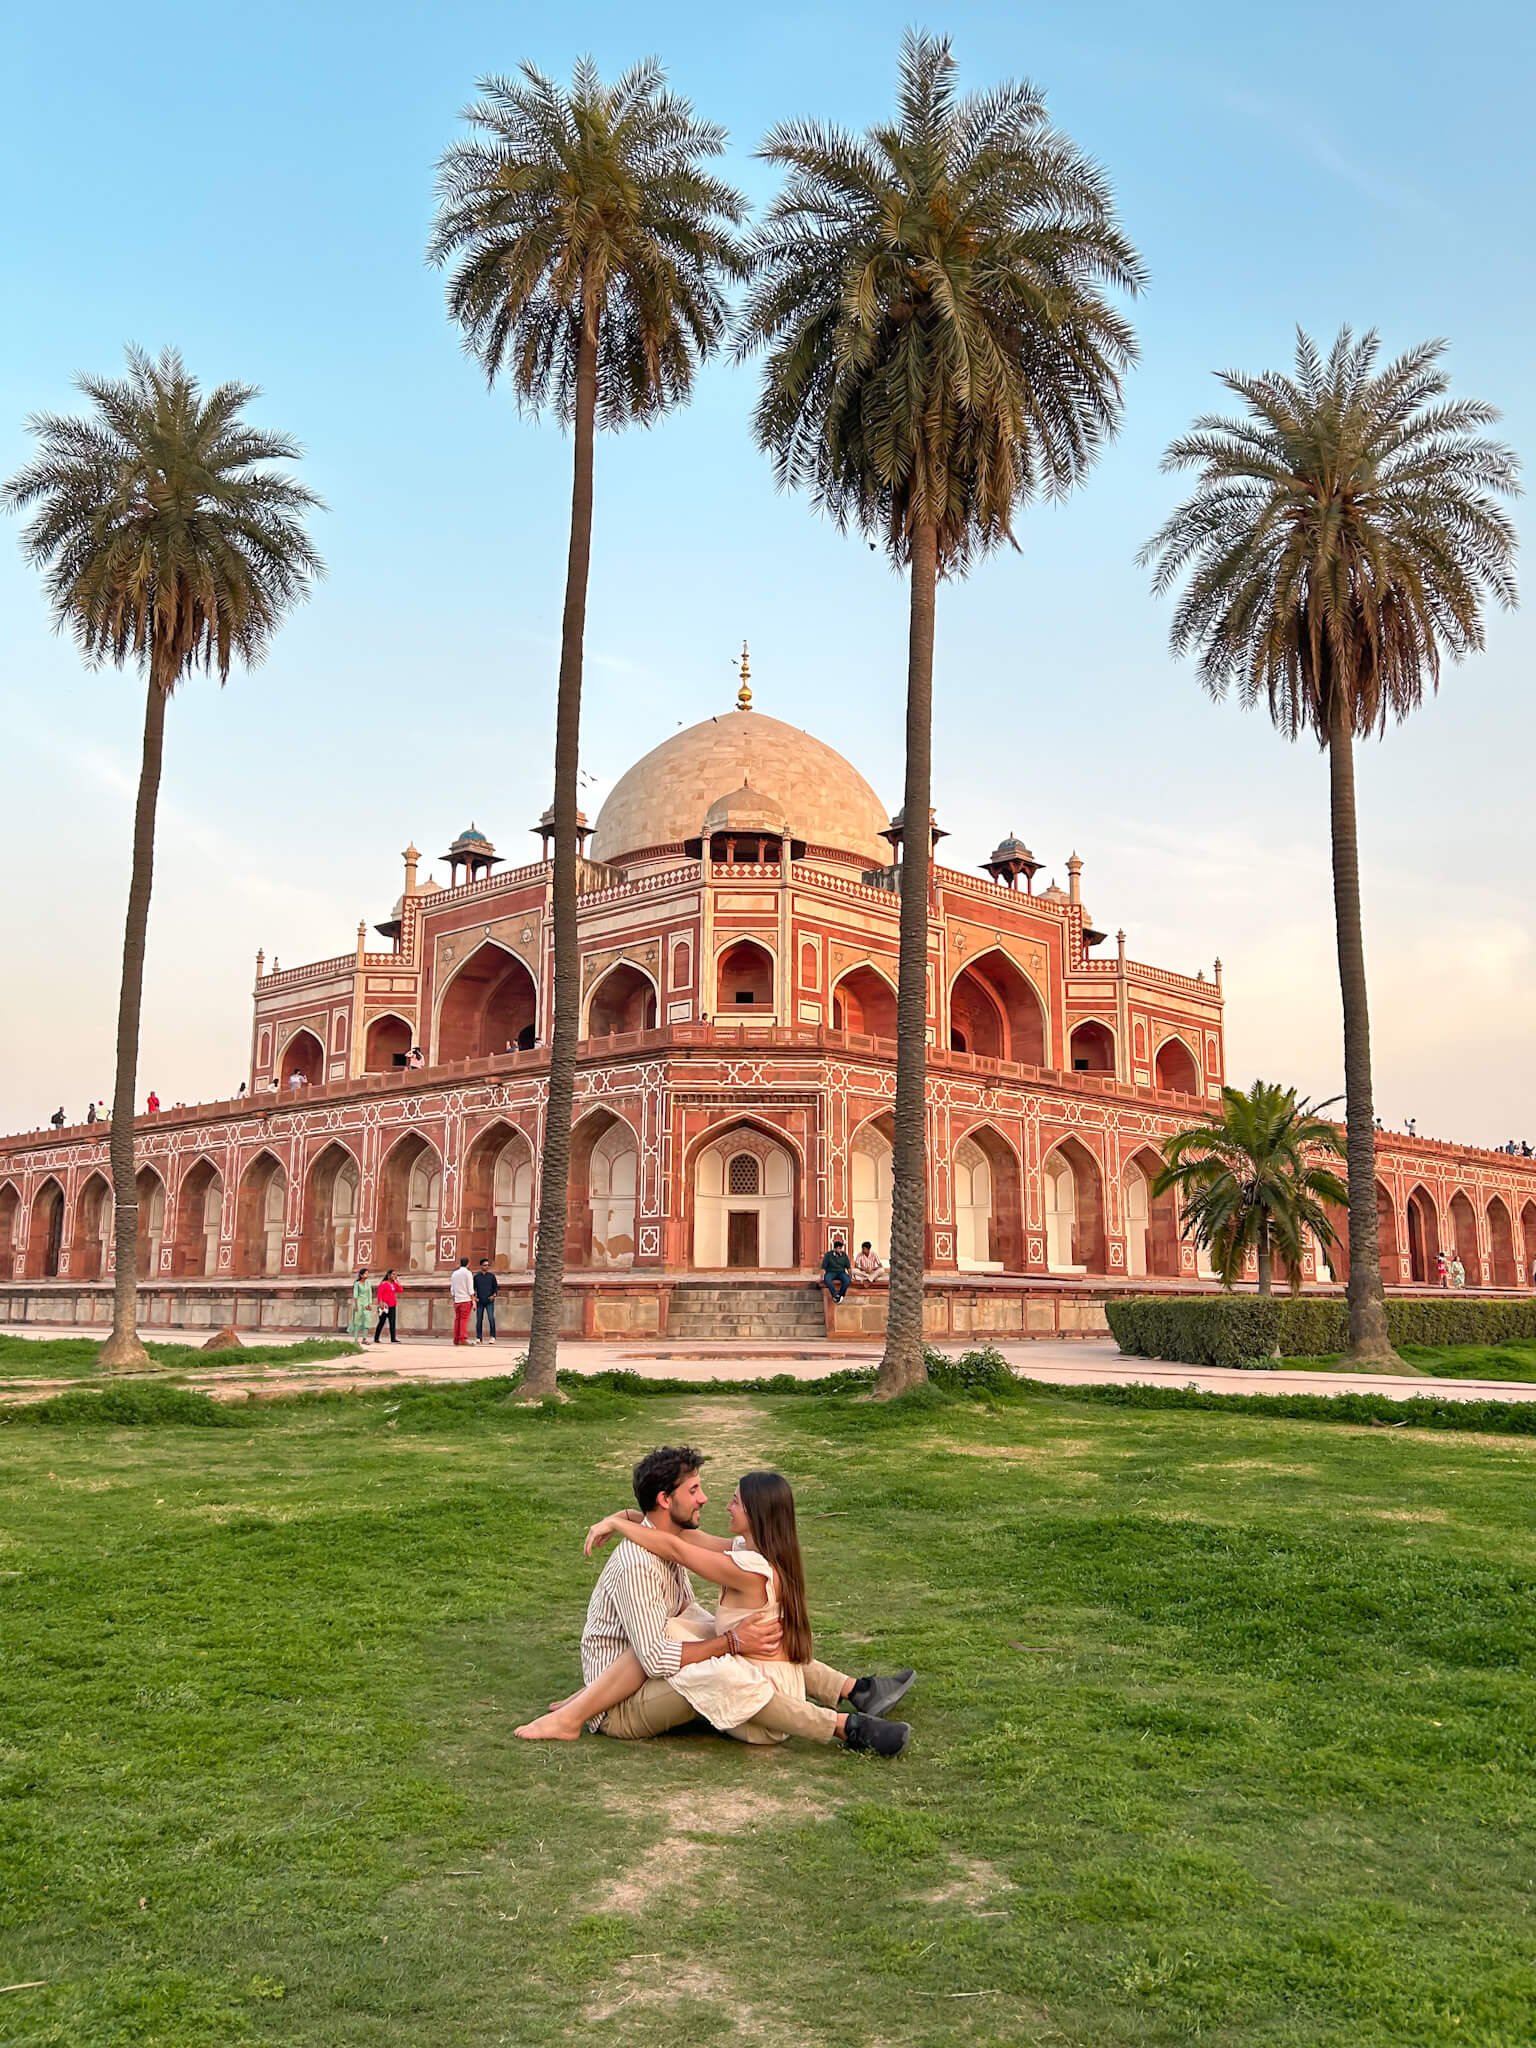 Hamayun's tomb, things to do in Delhi, India